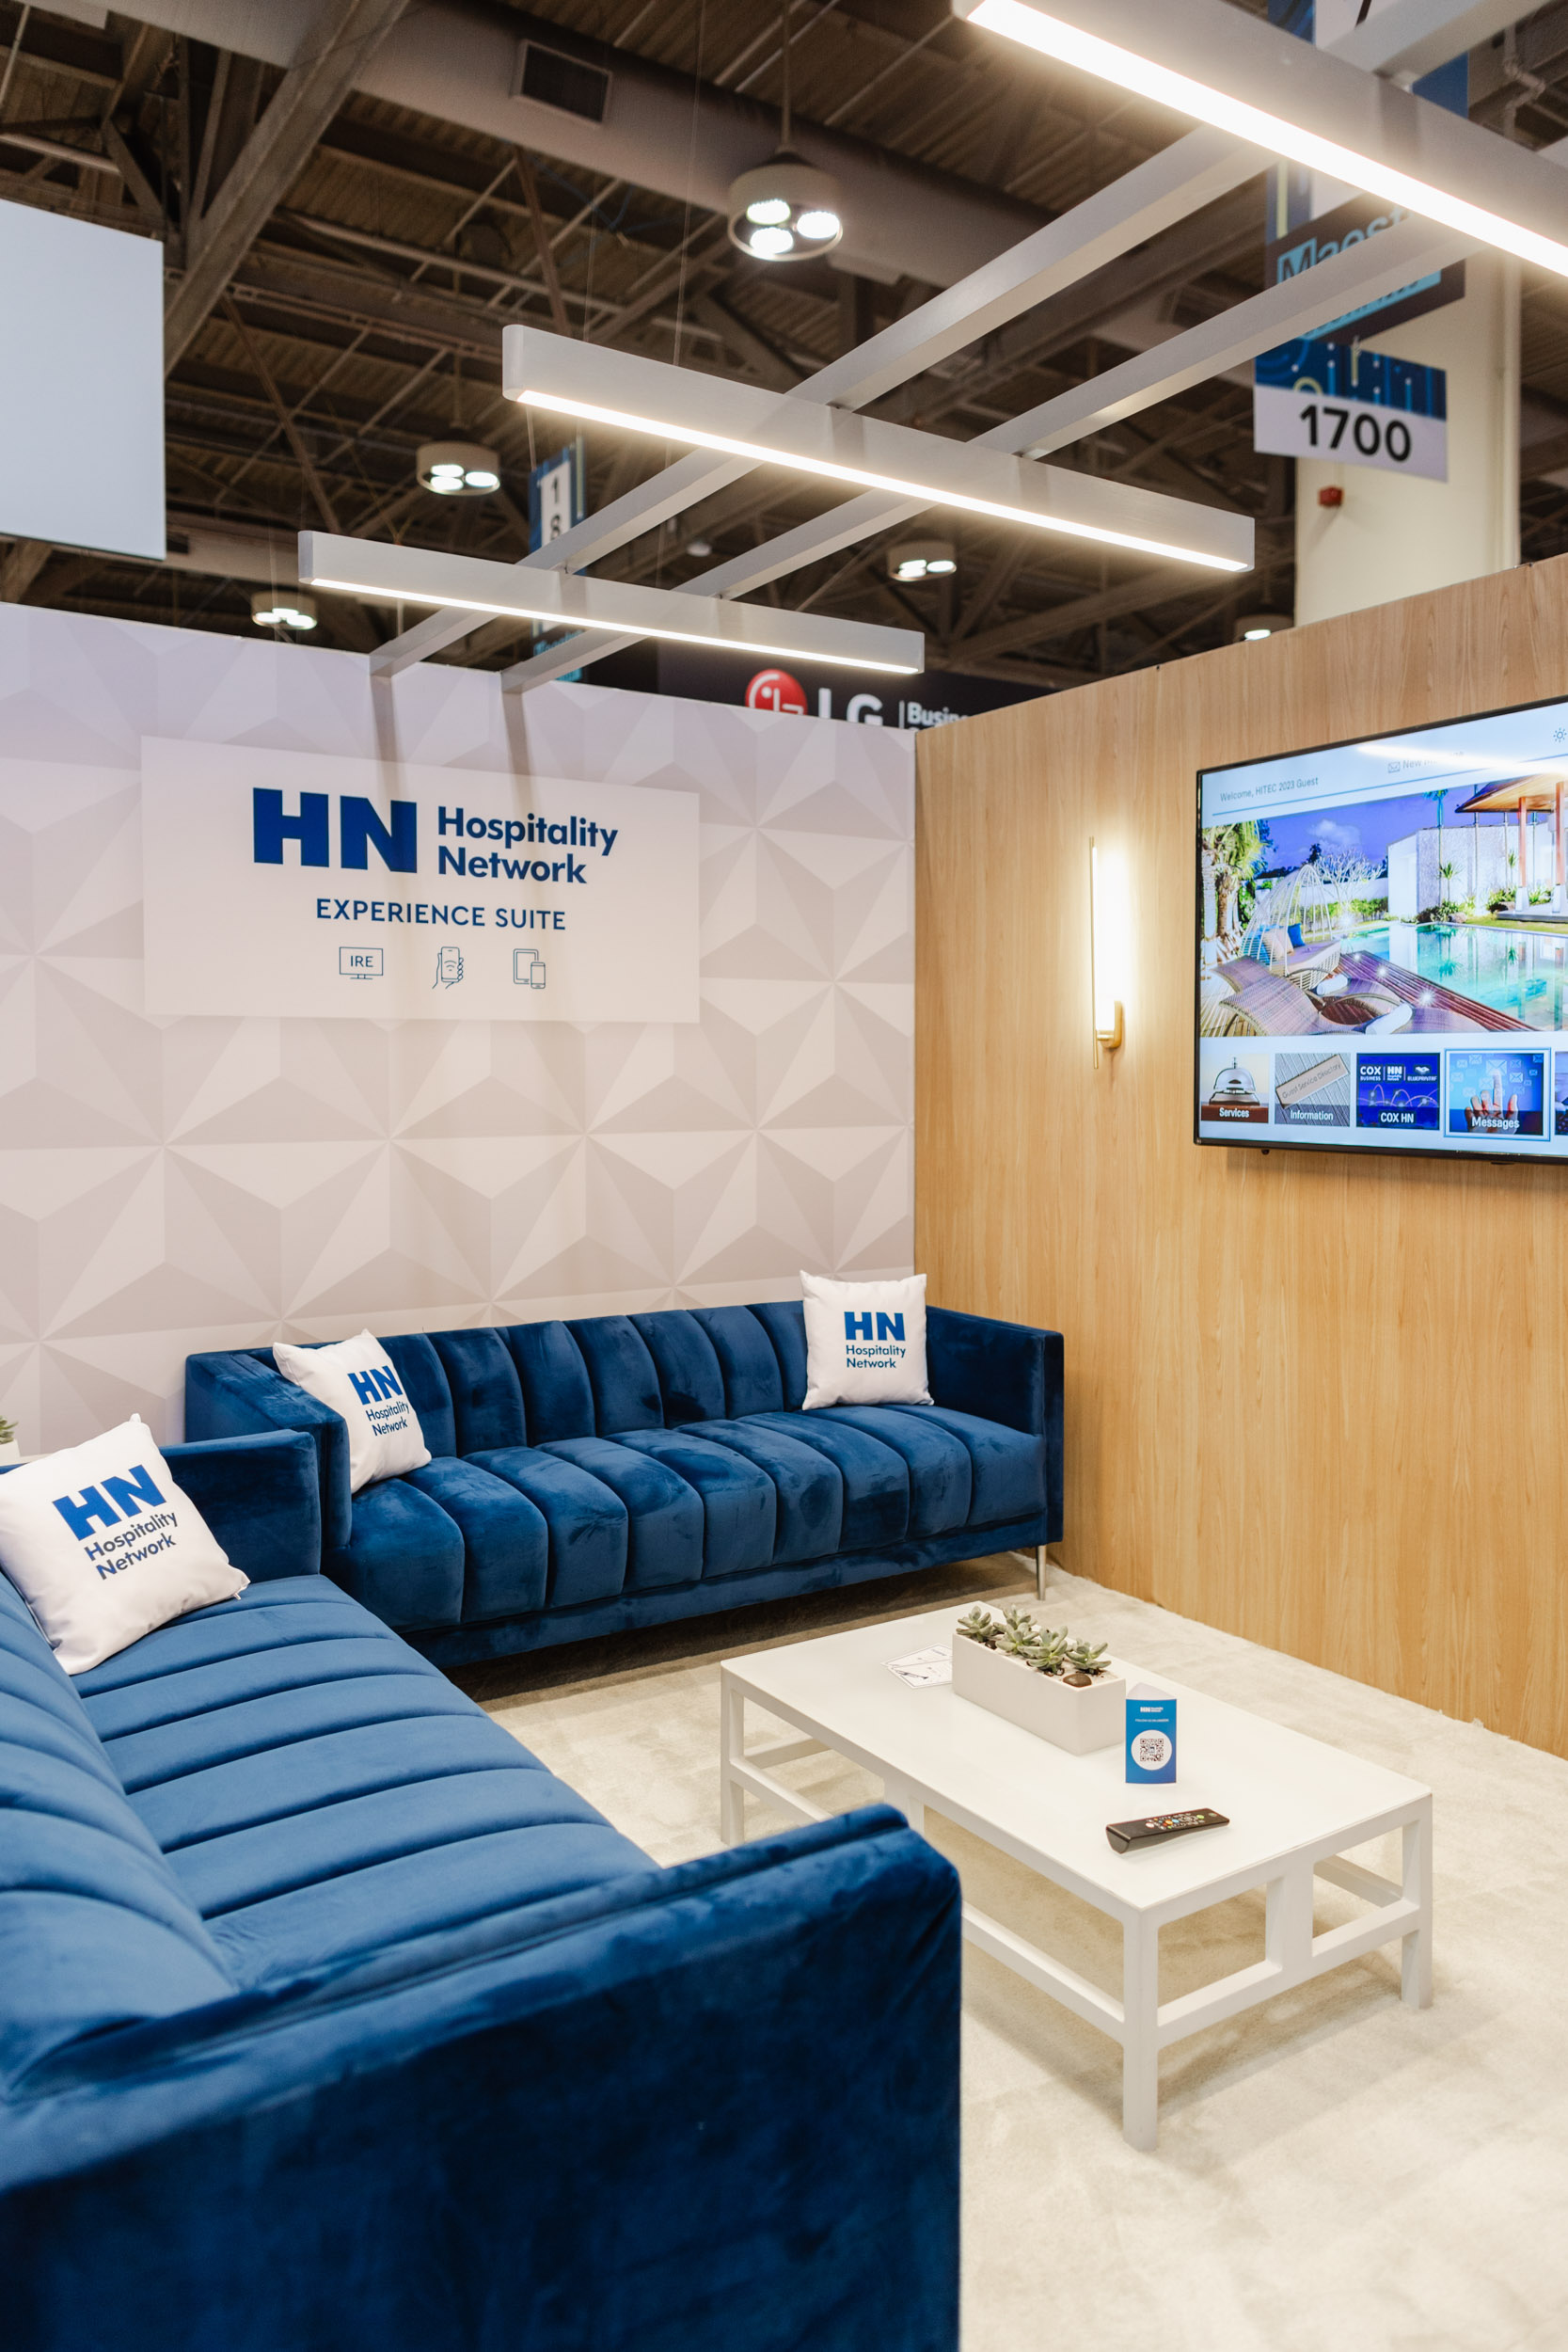 A blue couch in a room with a TV at a Toronto trade show.